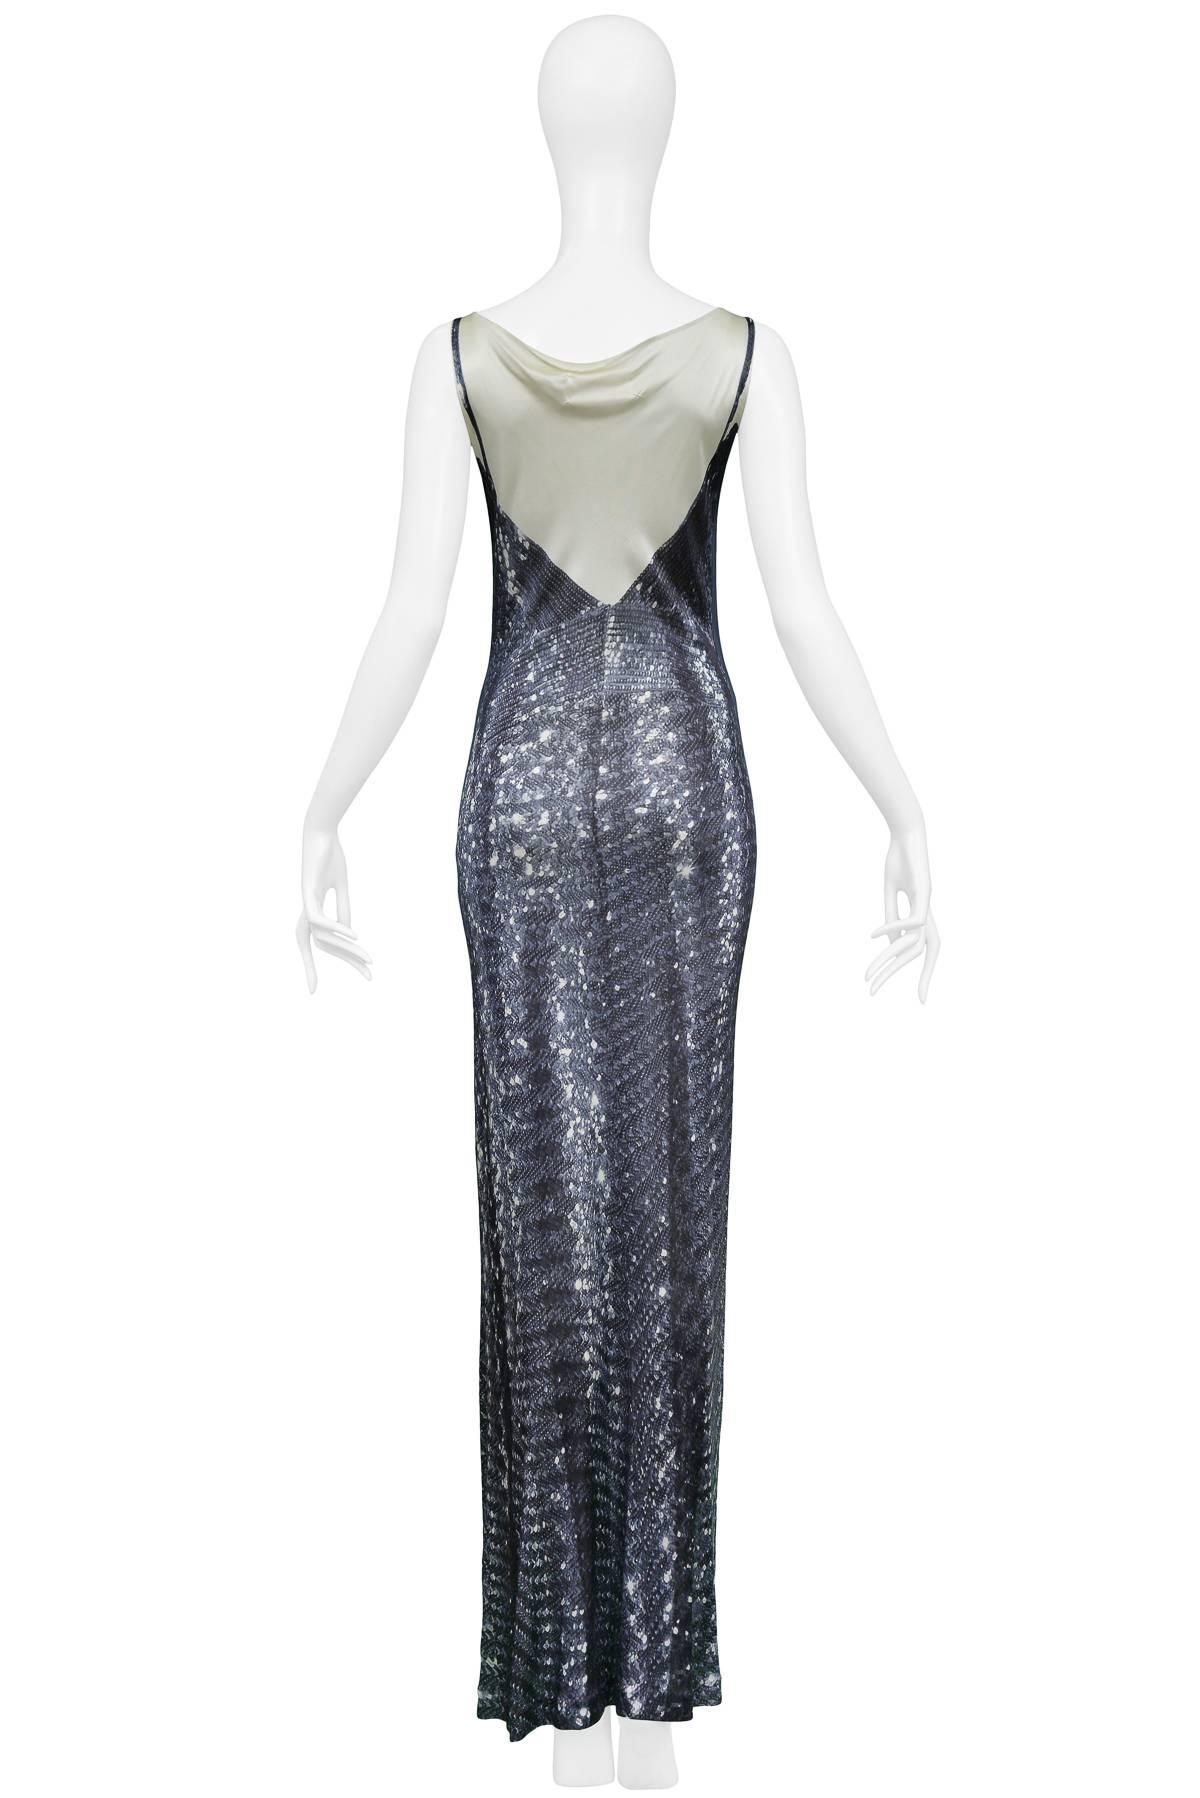 MAISON MARTIN MARGIELA
ICONIC SEQUIN PRINT DRESS 1996
Condition : Excellent Vintage Condition
Size : Small/Medium
Vintage blue tone Martin Margiela trompe l'oeil sequin print silk jersey gown. Off set print featured on both sides. Collection 1996.